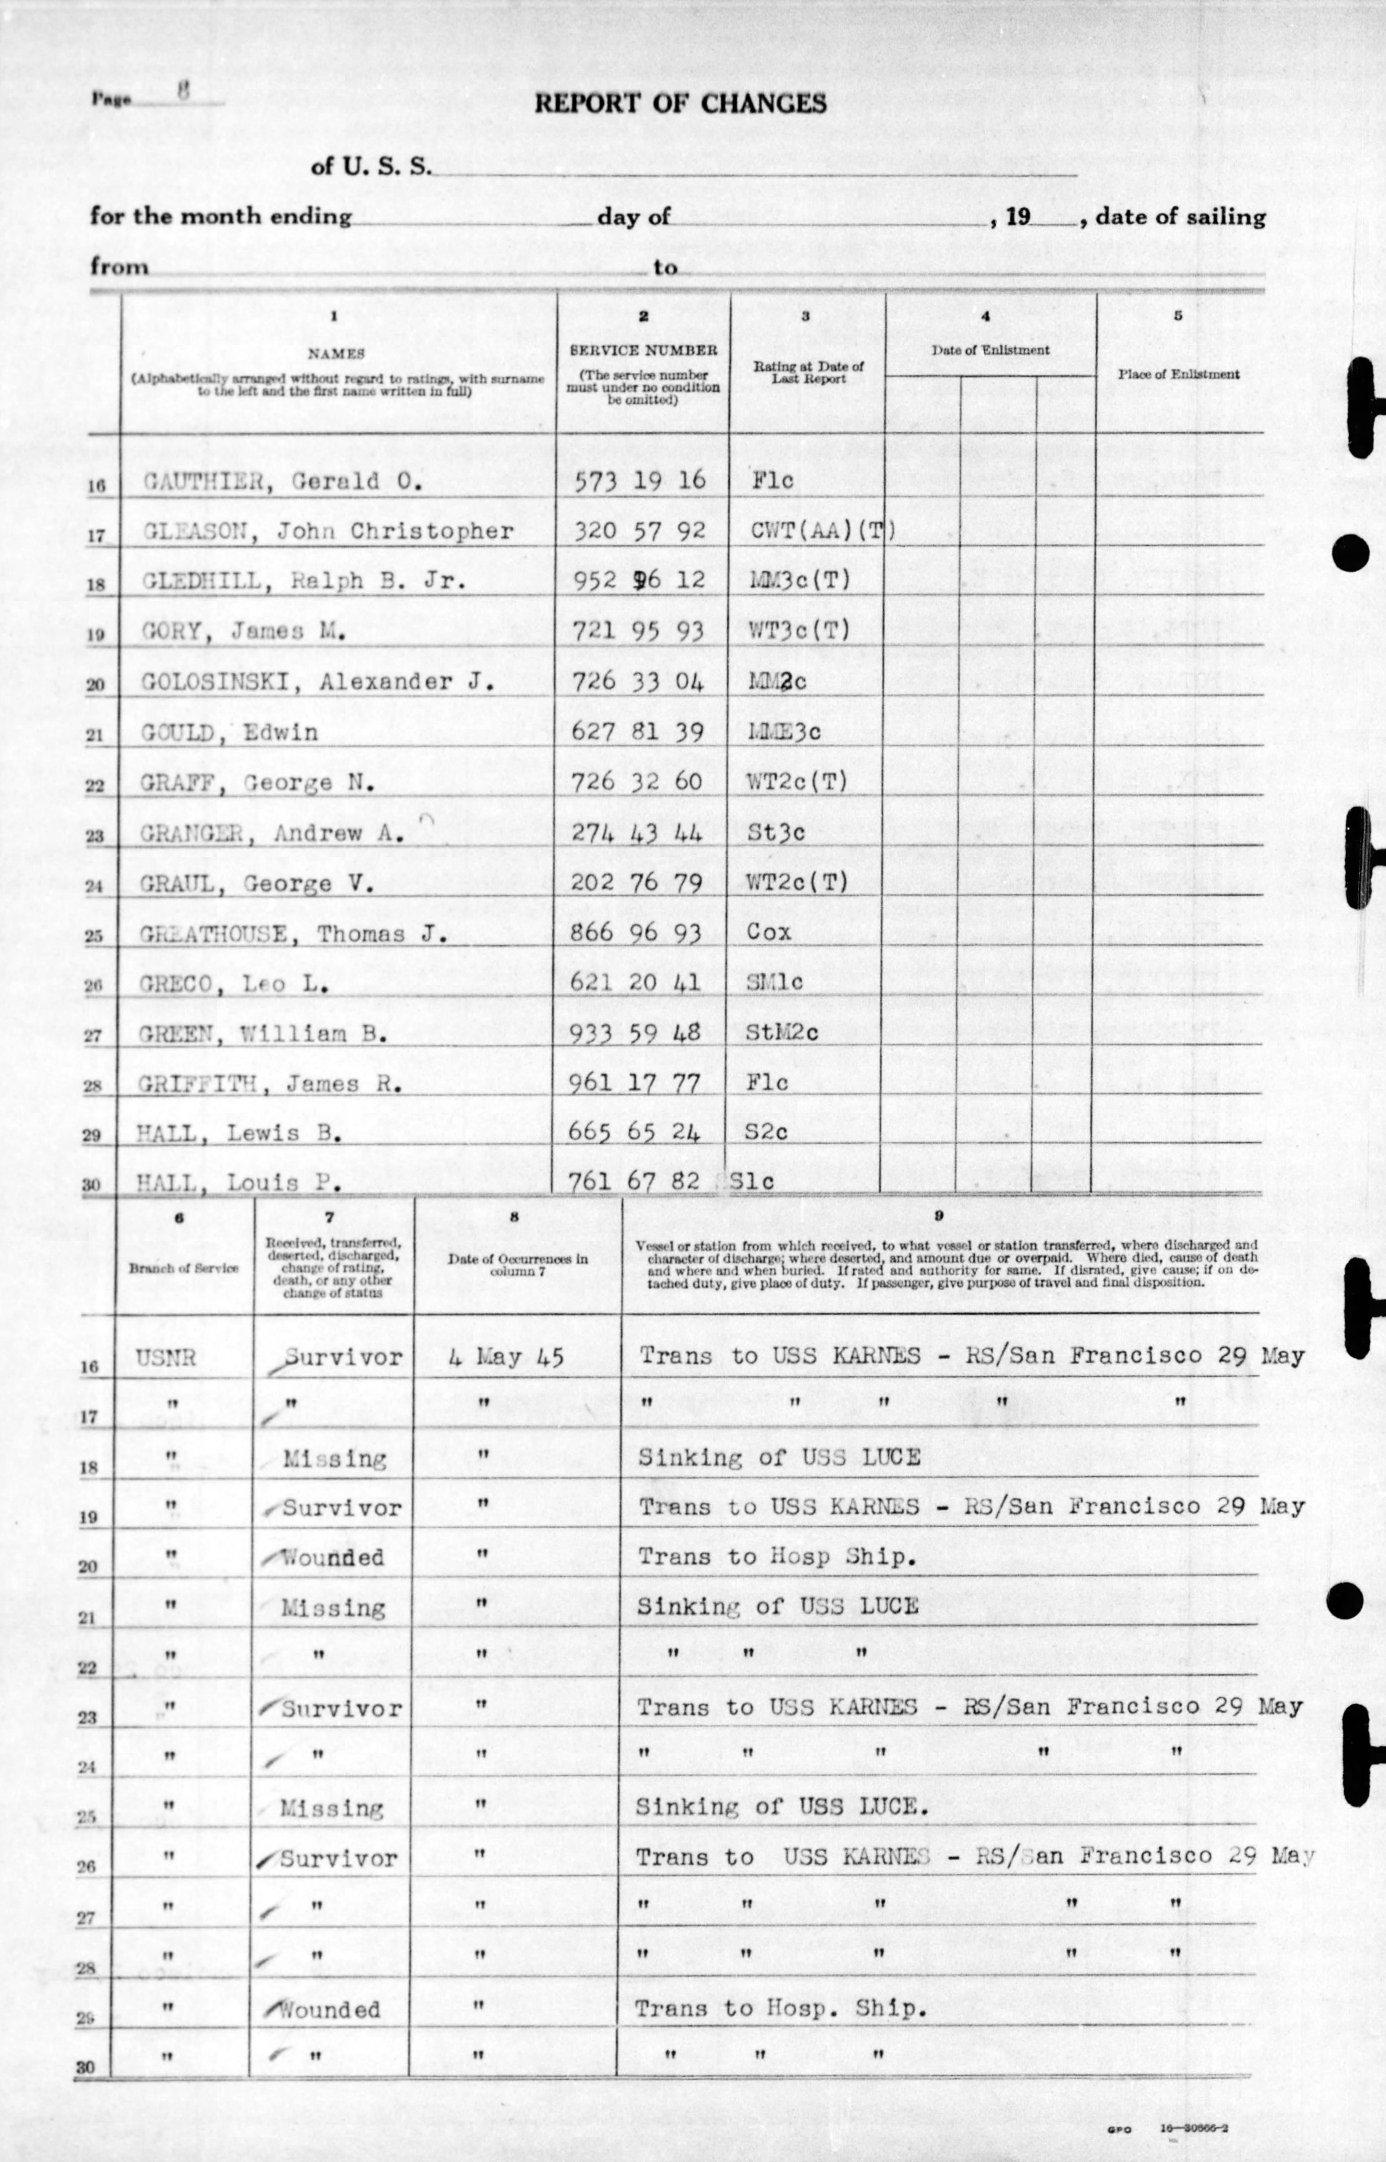 USS Luce final muster list dated June 19, 1945 after the ship was sunk May 4, 1945. Page 10 of 25.